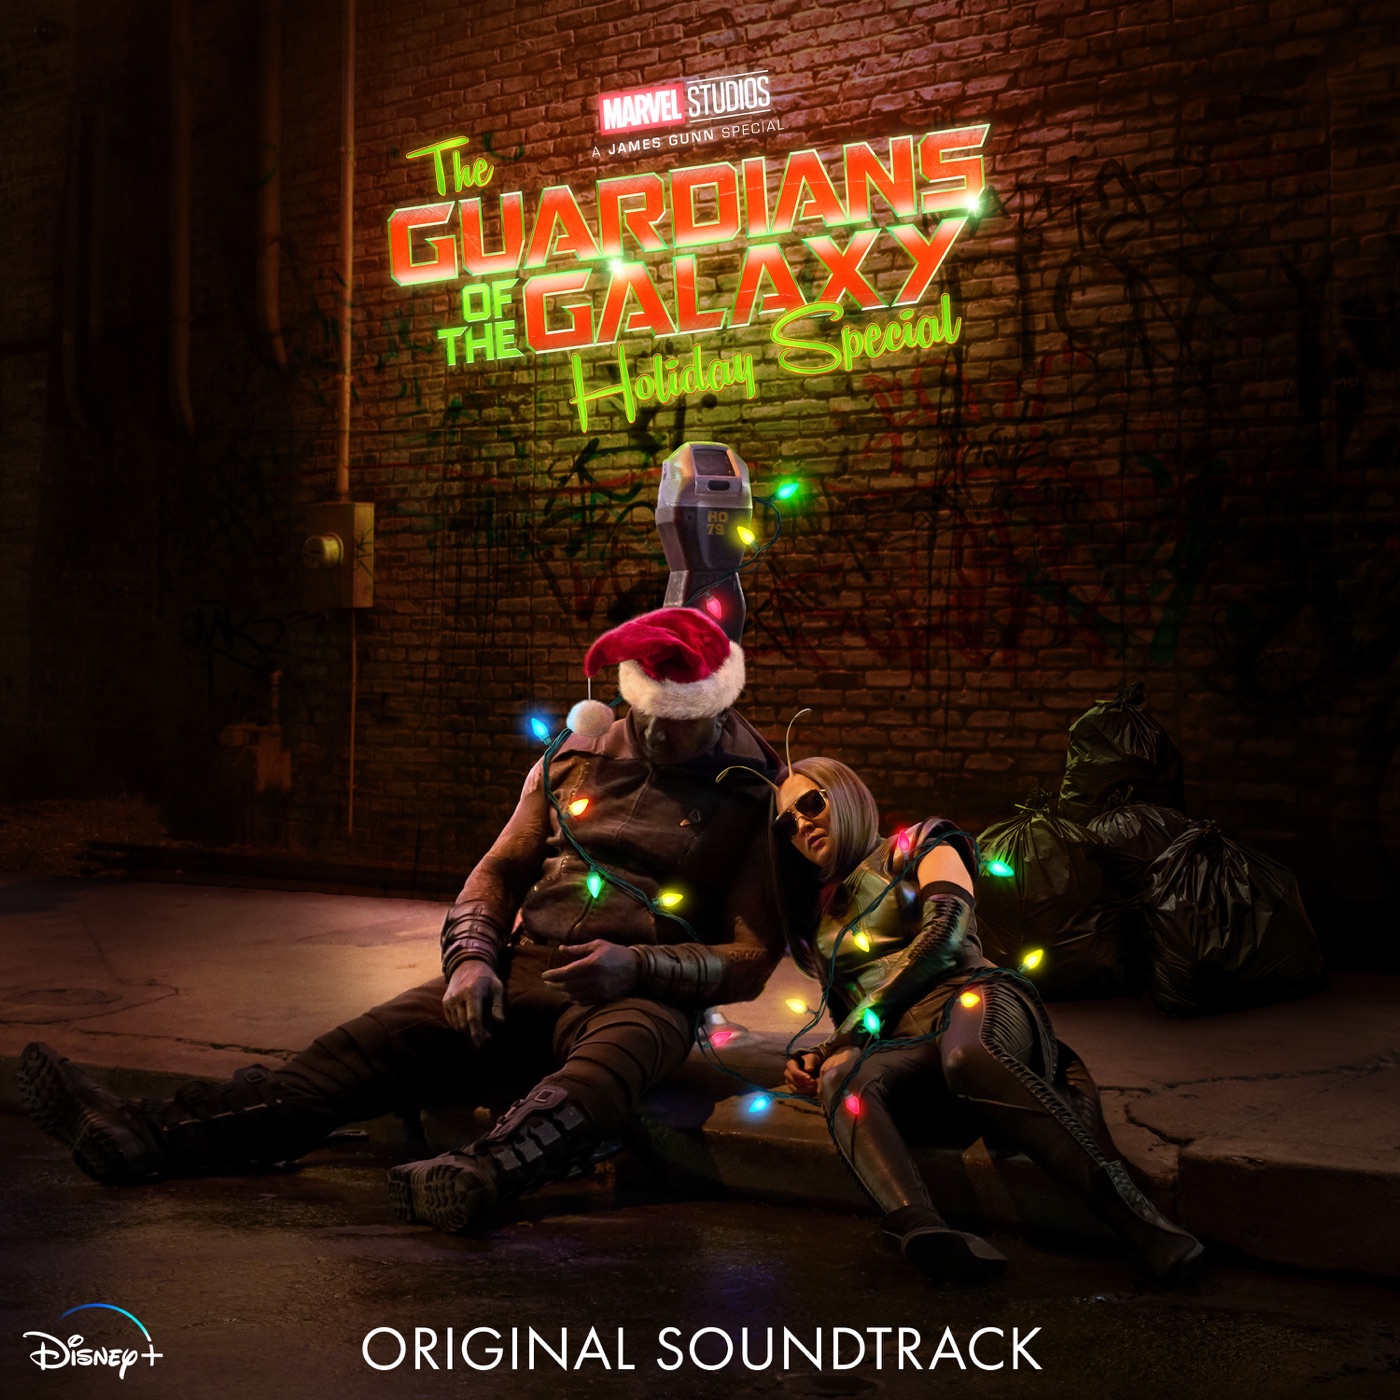 The Guardians of the Galaxy Holiday Special (Original Soundtrack) by John Murphy